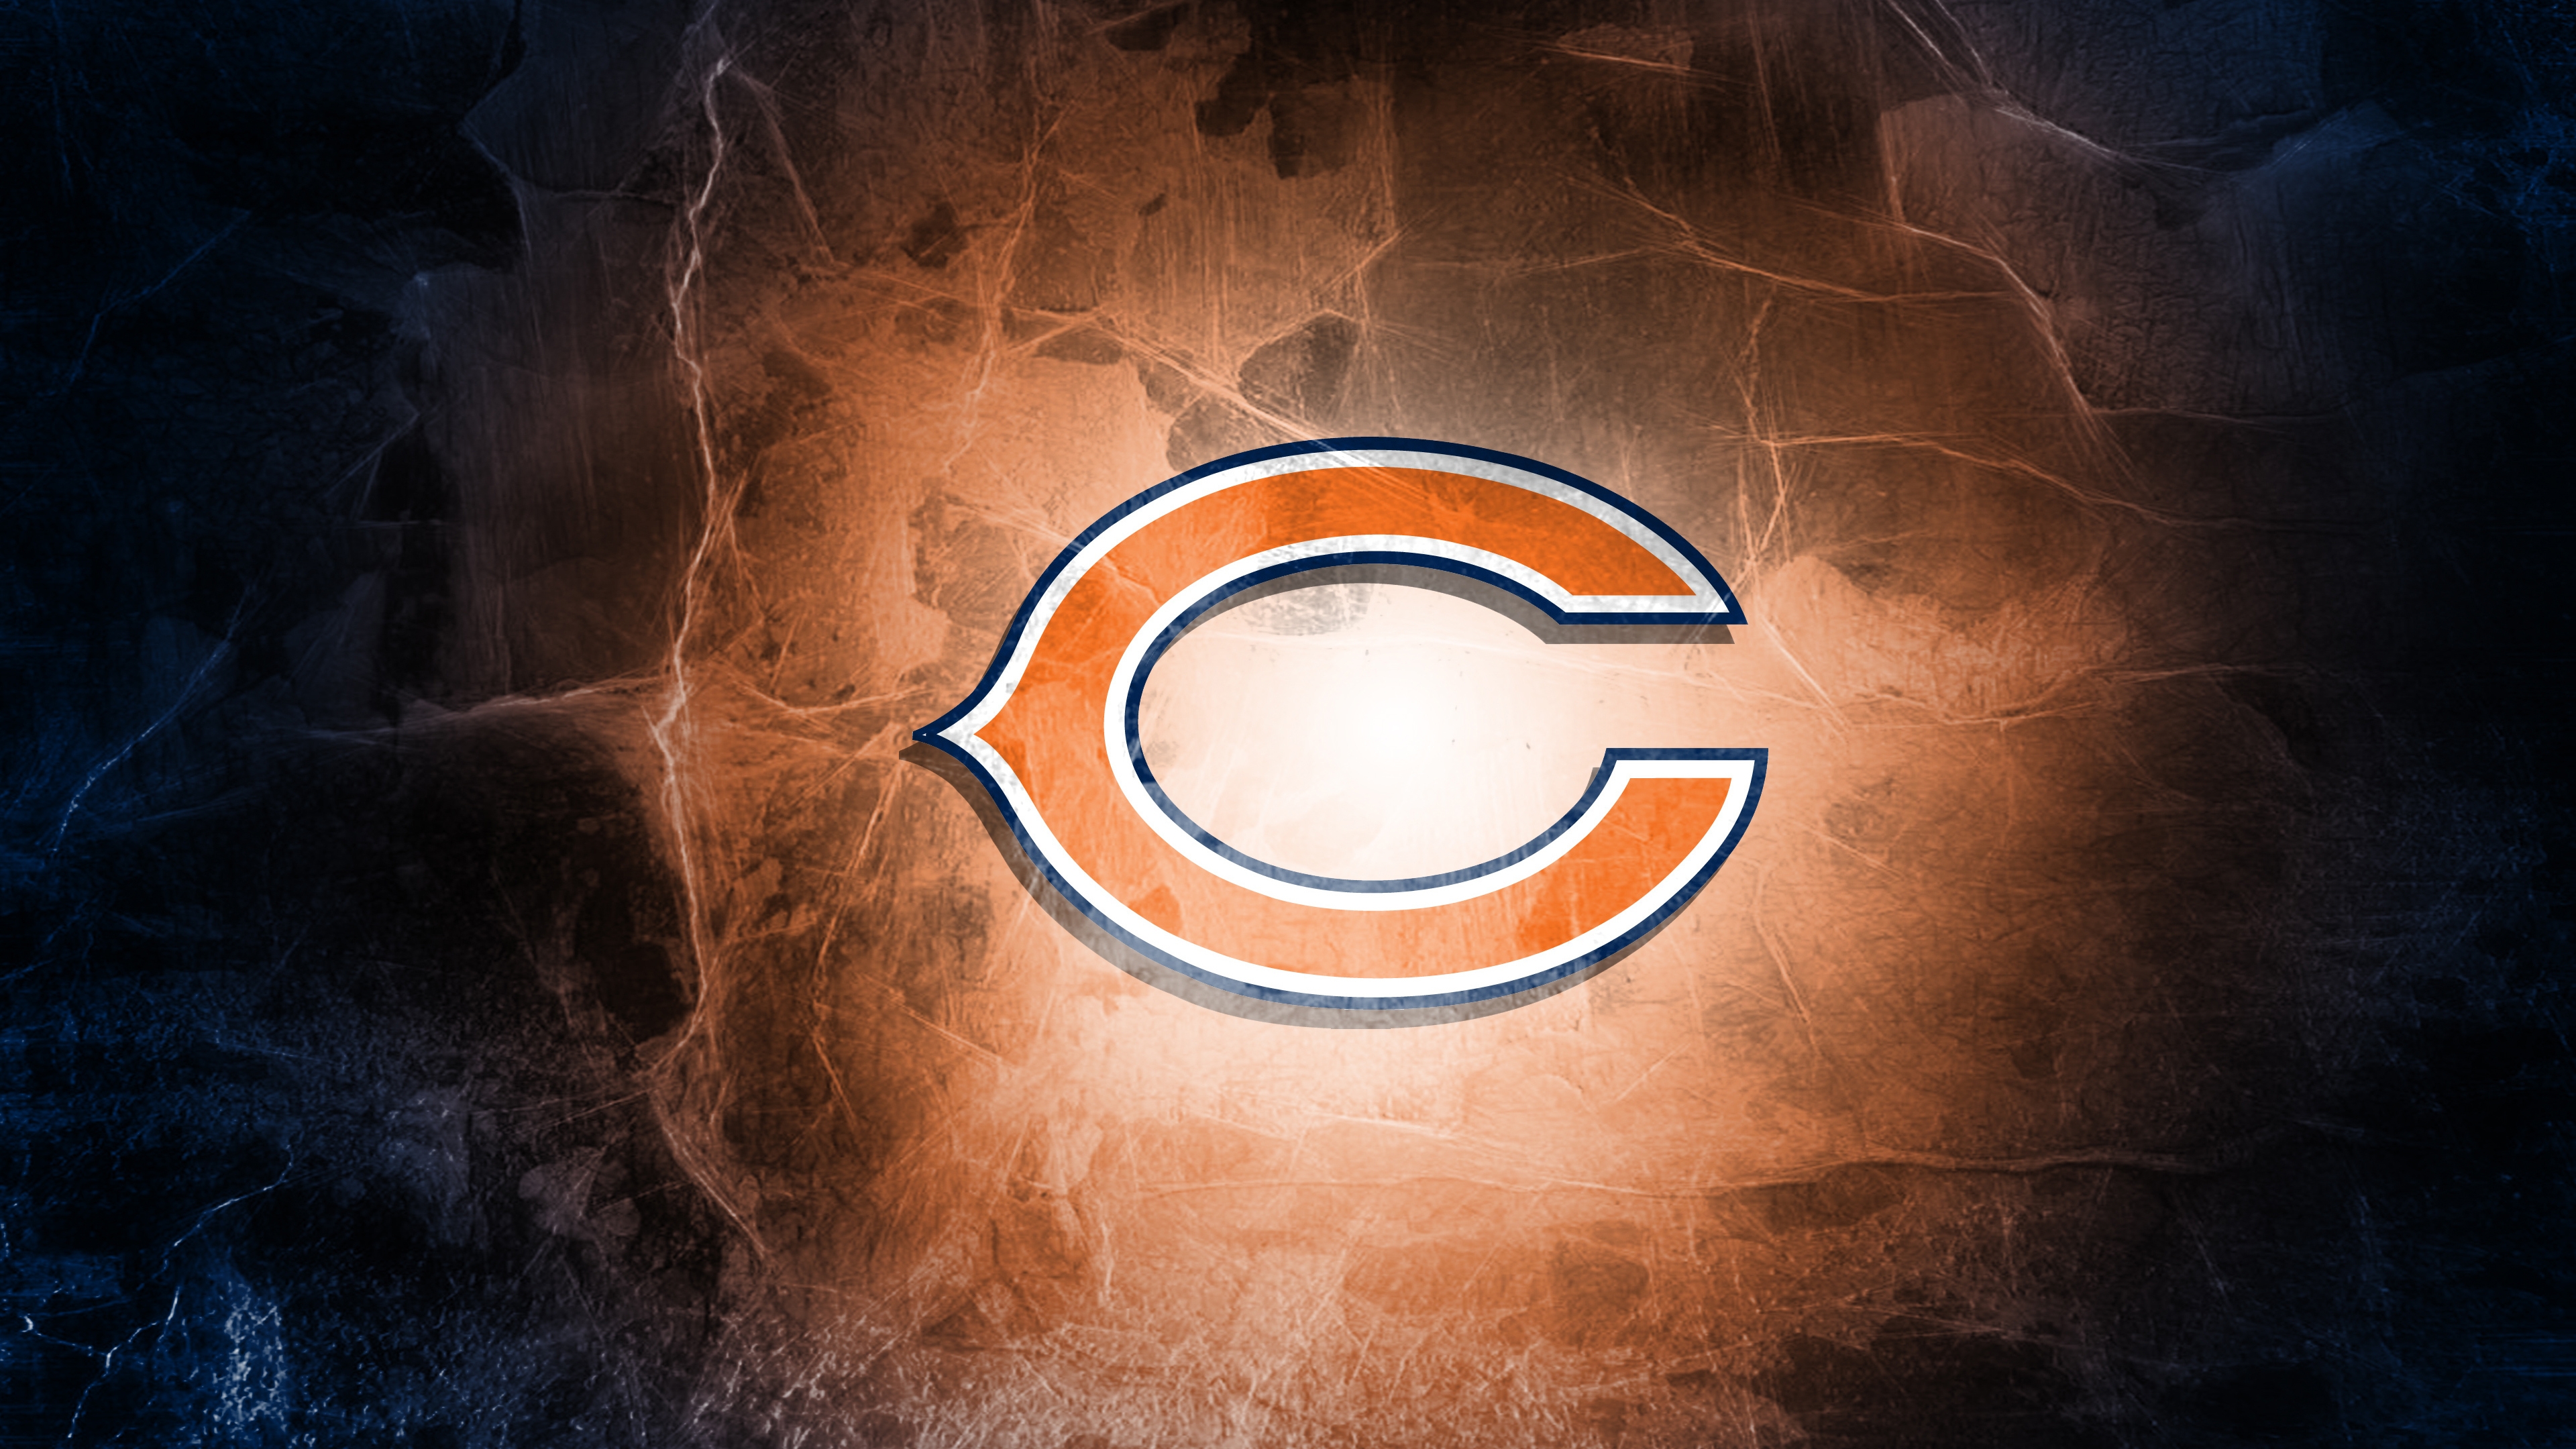 Chicago Bears Logo for 3840 x 2160 Ultra HD resolution